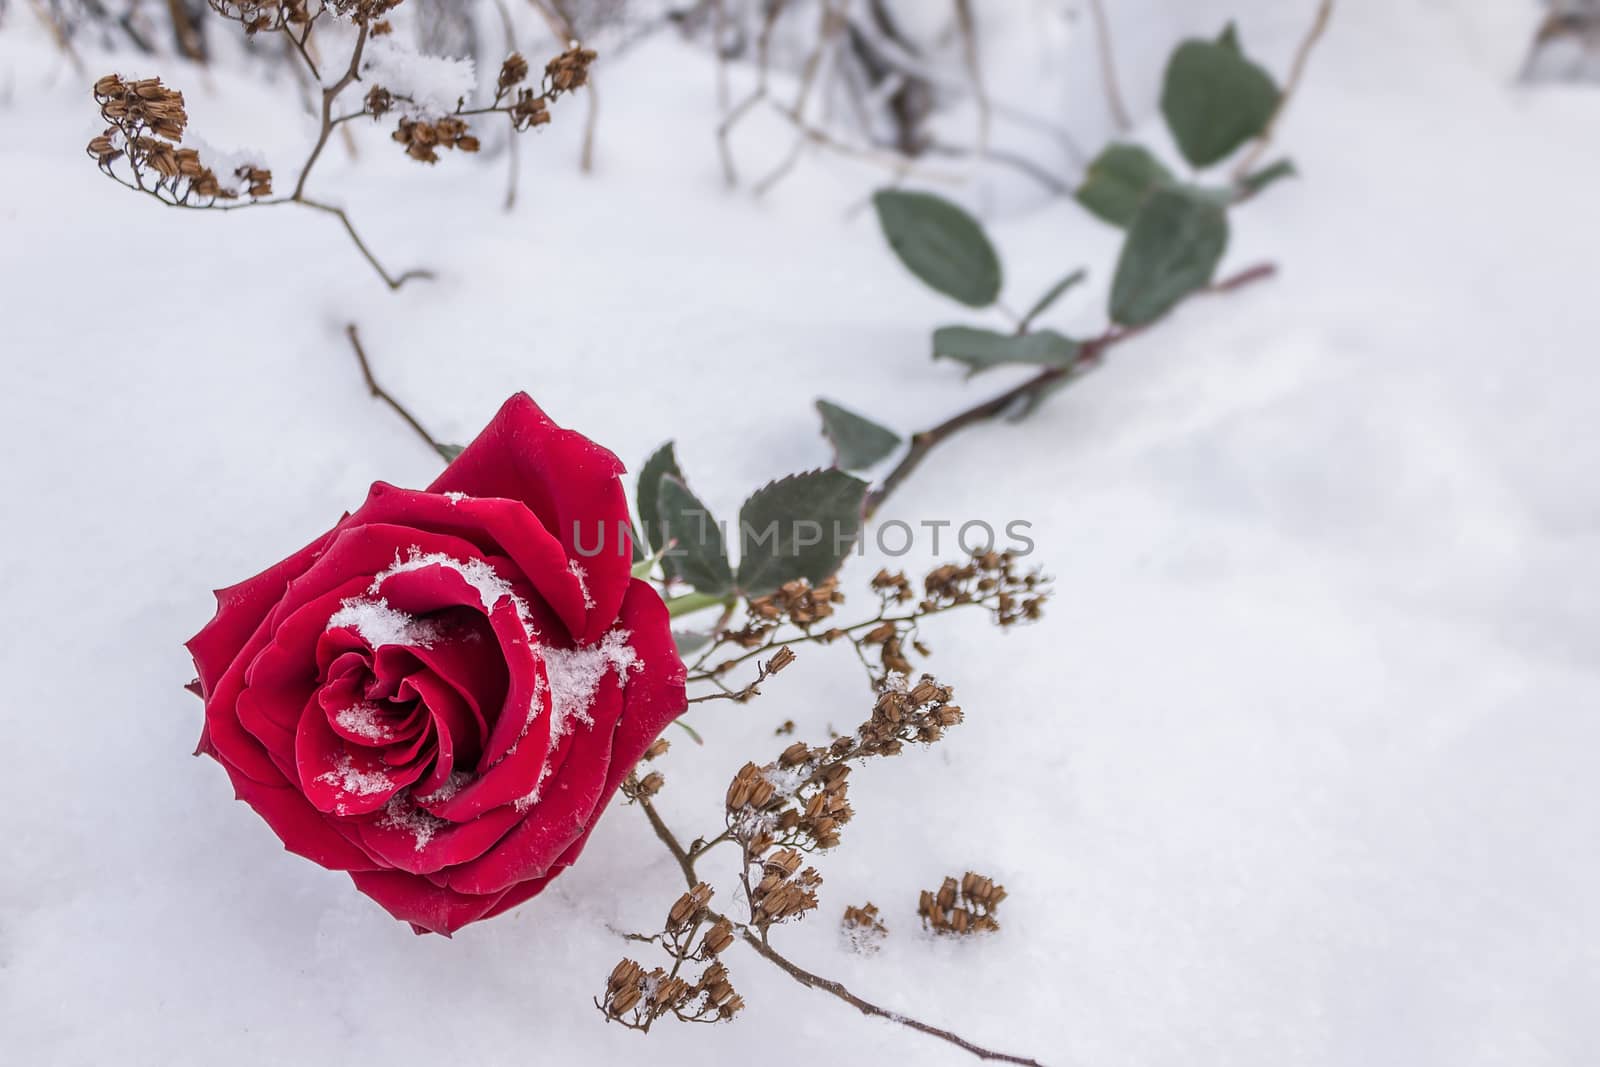 Red rose in winter and its tender petals in the snow during a wedding ceremony